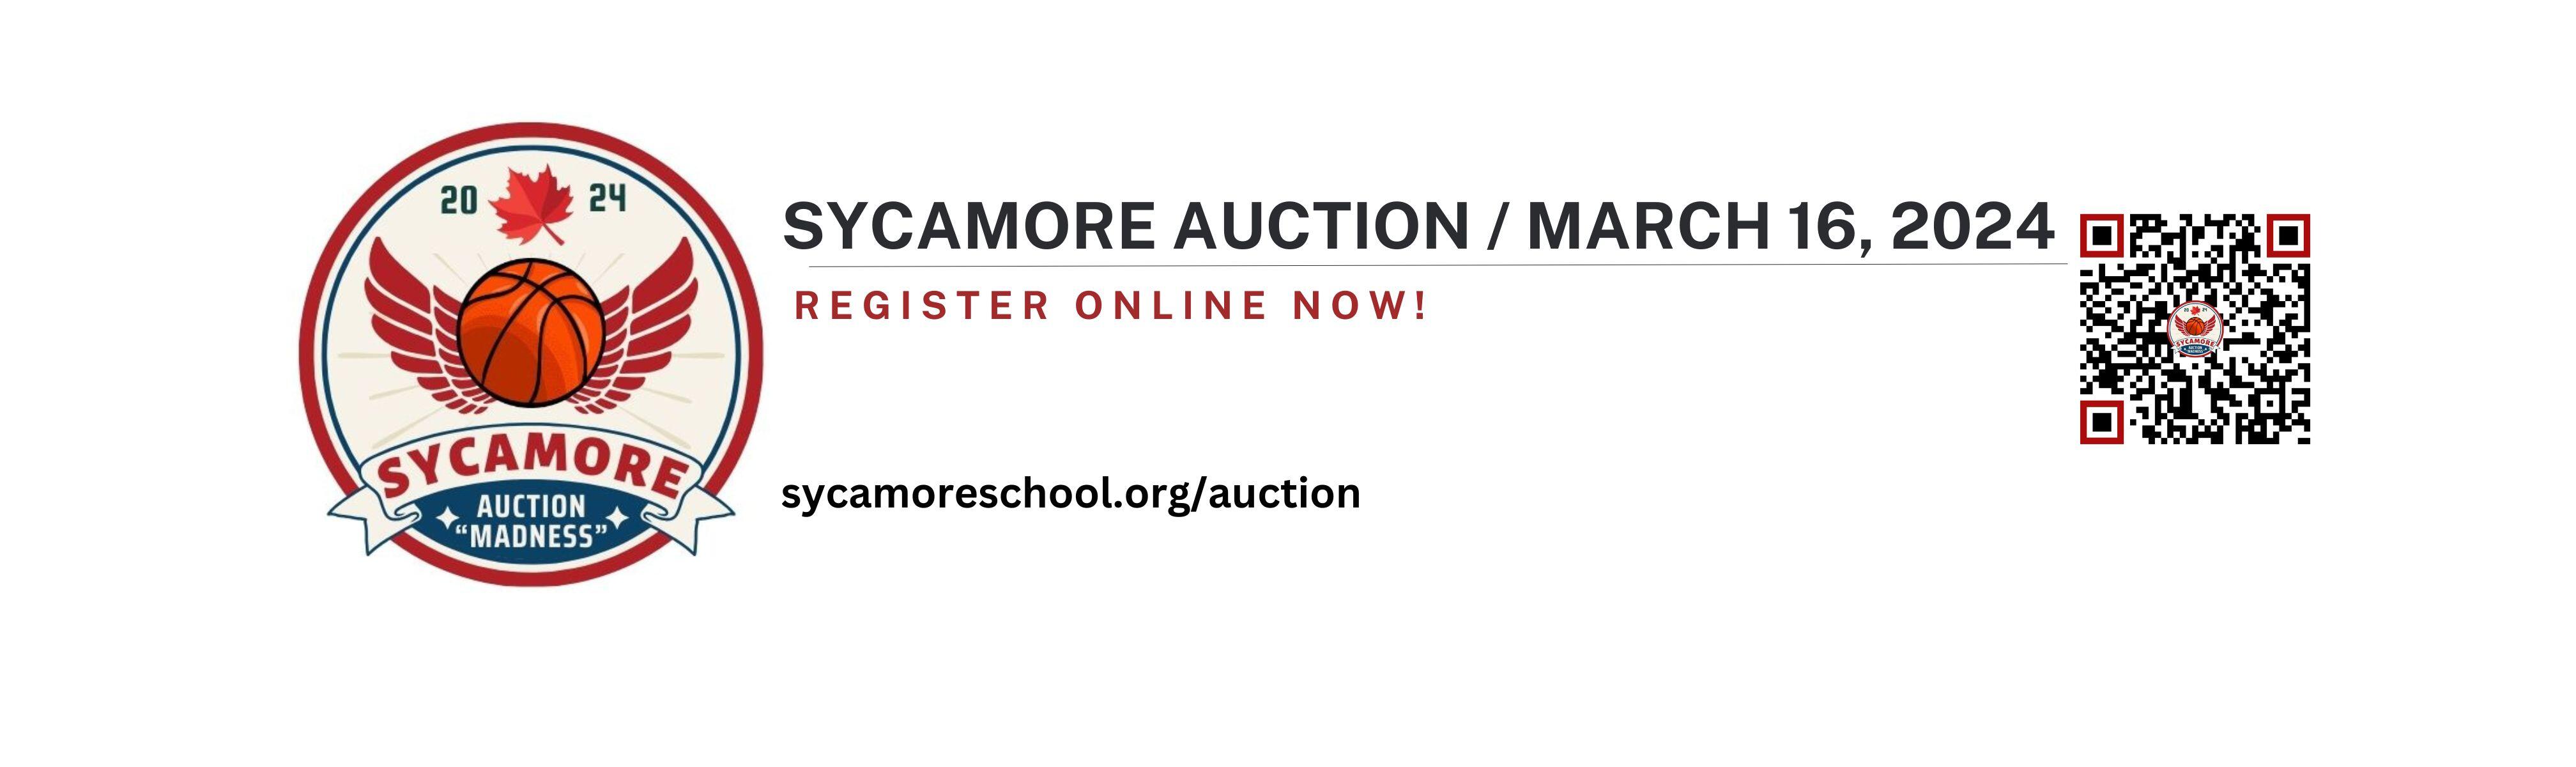 Sycamore Auction Madness